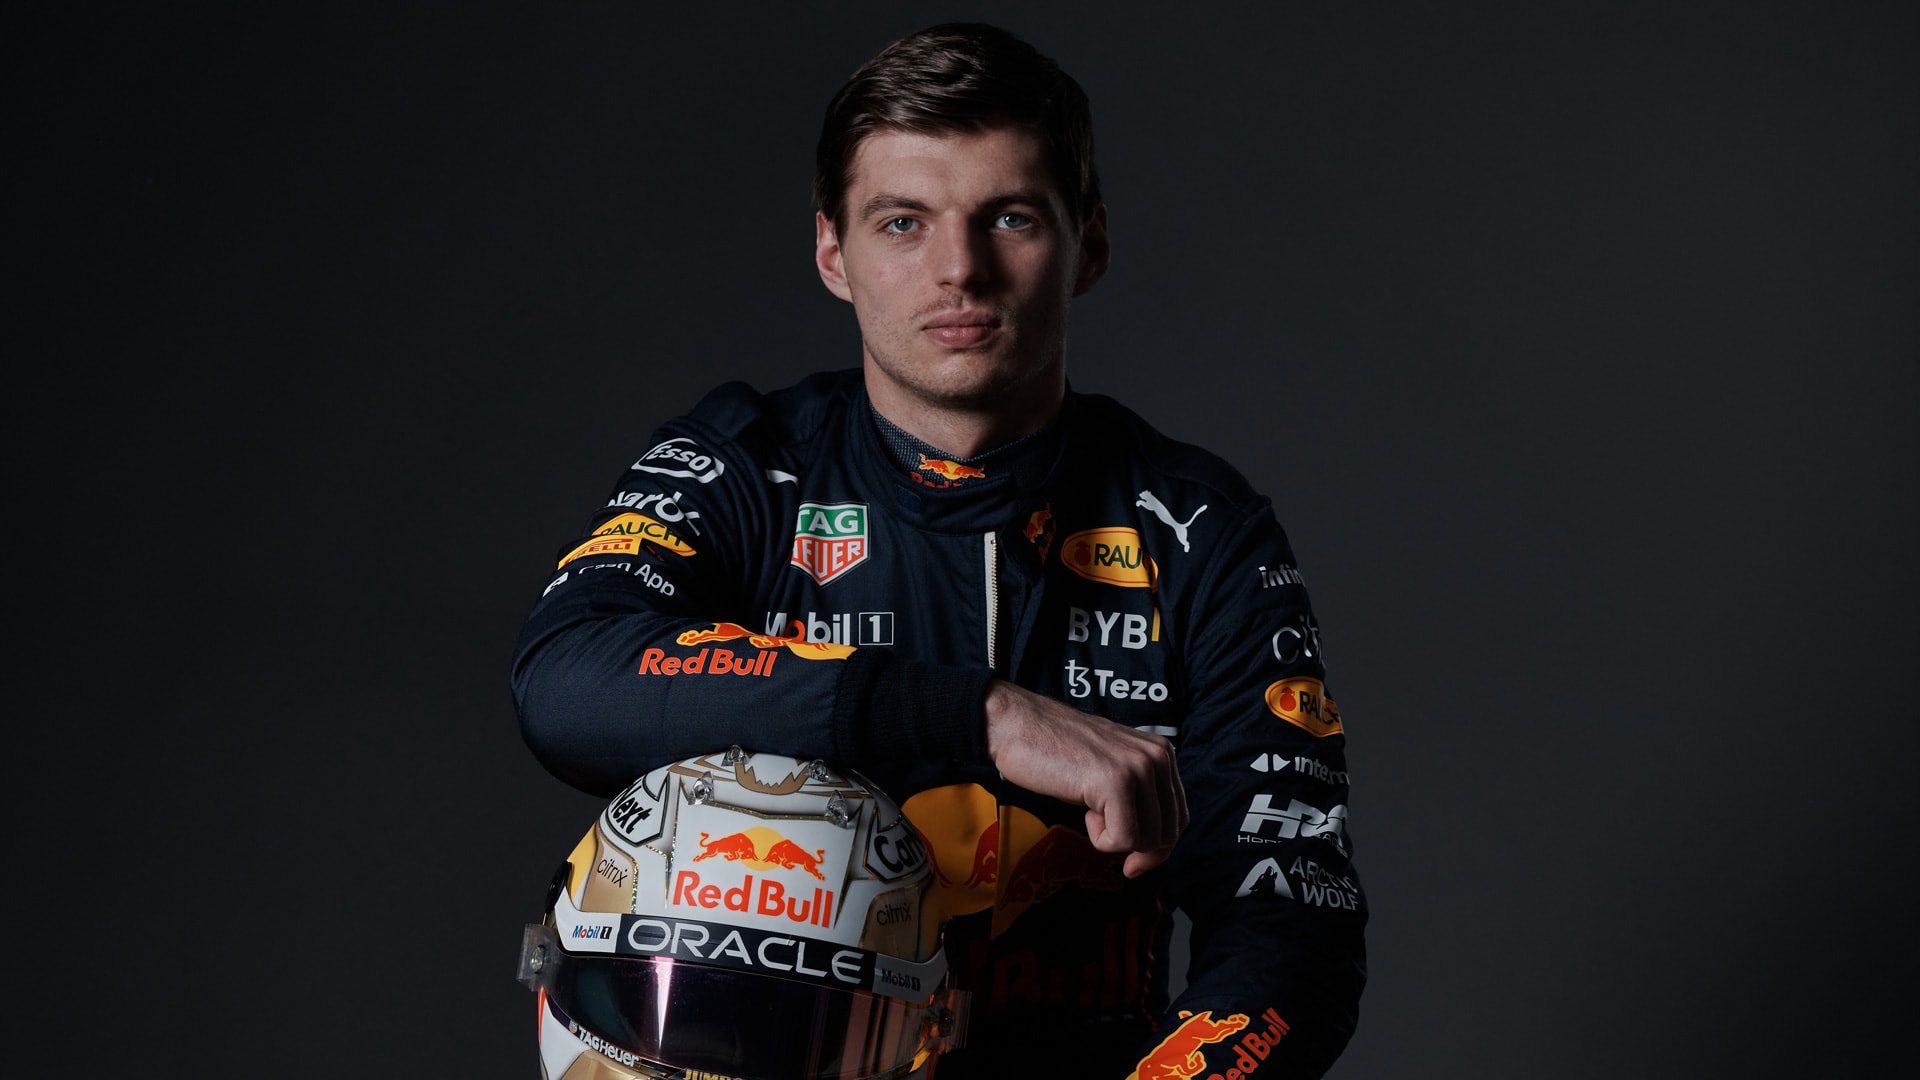 Why is Max Verstappen so good? A racing driver's perspective